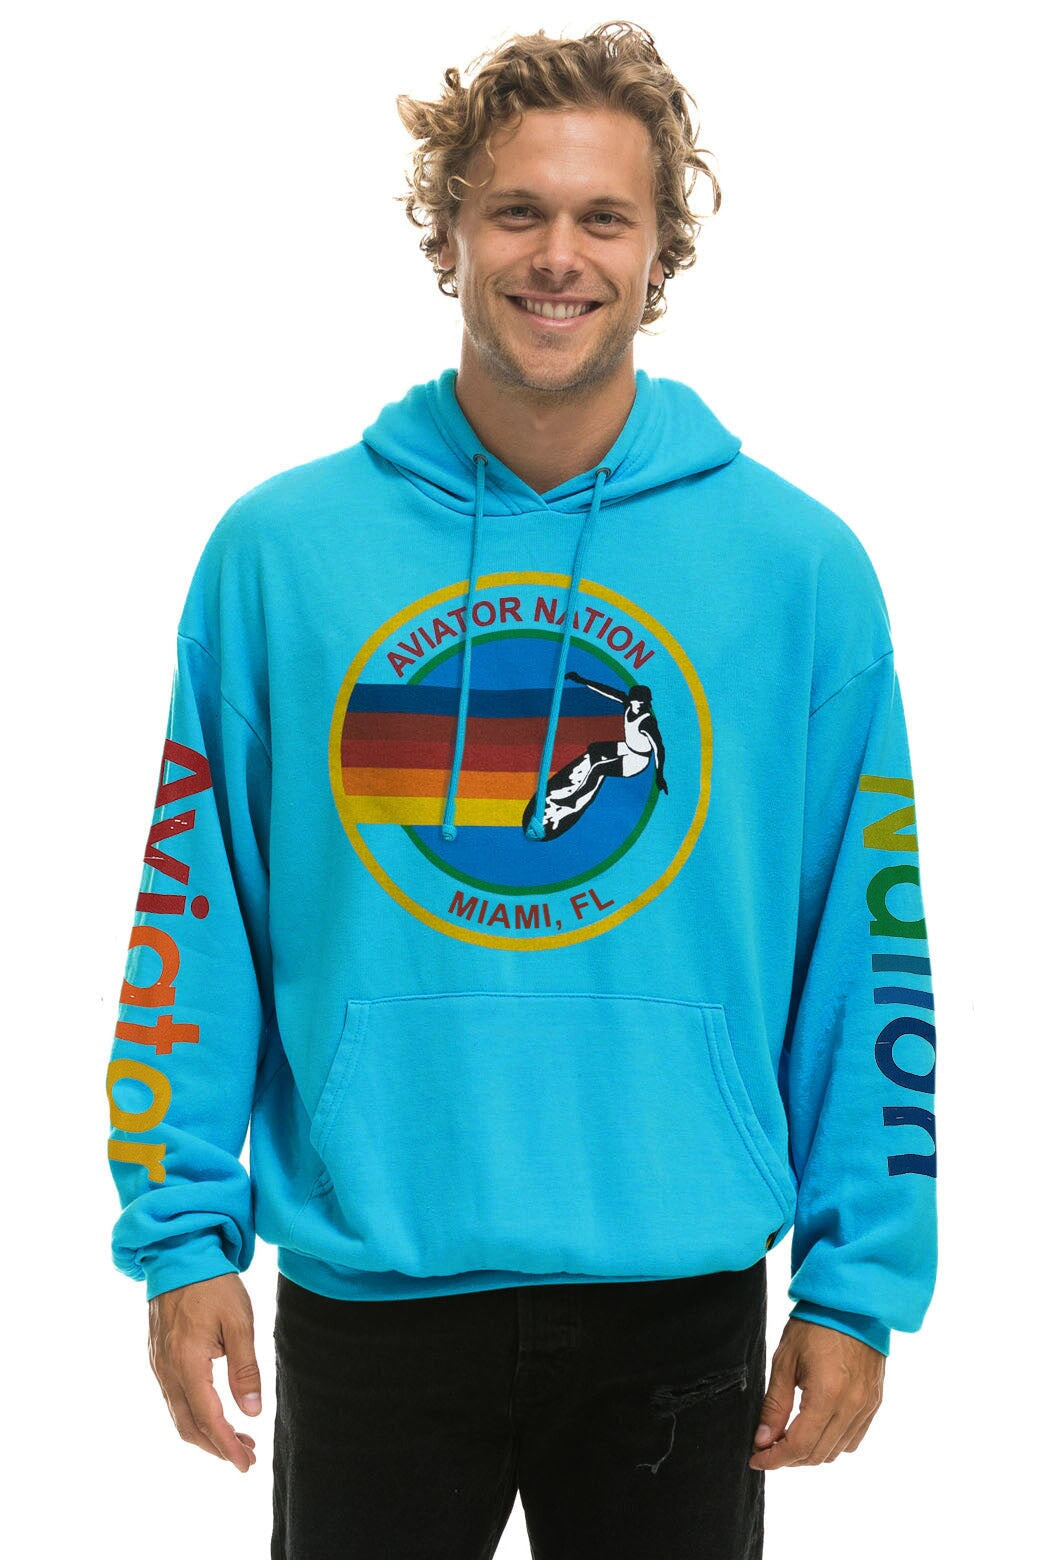 AVIATOR NATION MIAMI RELAXED PULLOVER HOODIE - NEON BLUE Hoodie Aviator Nation 